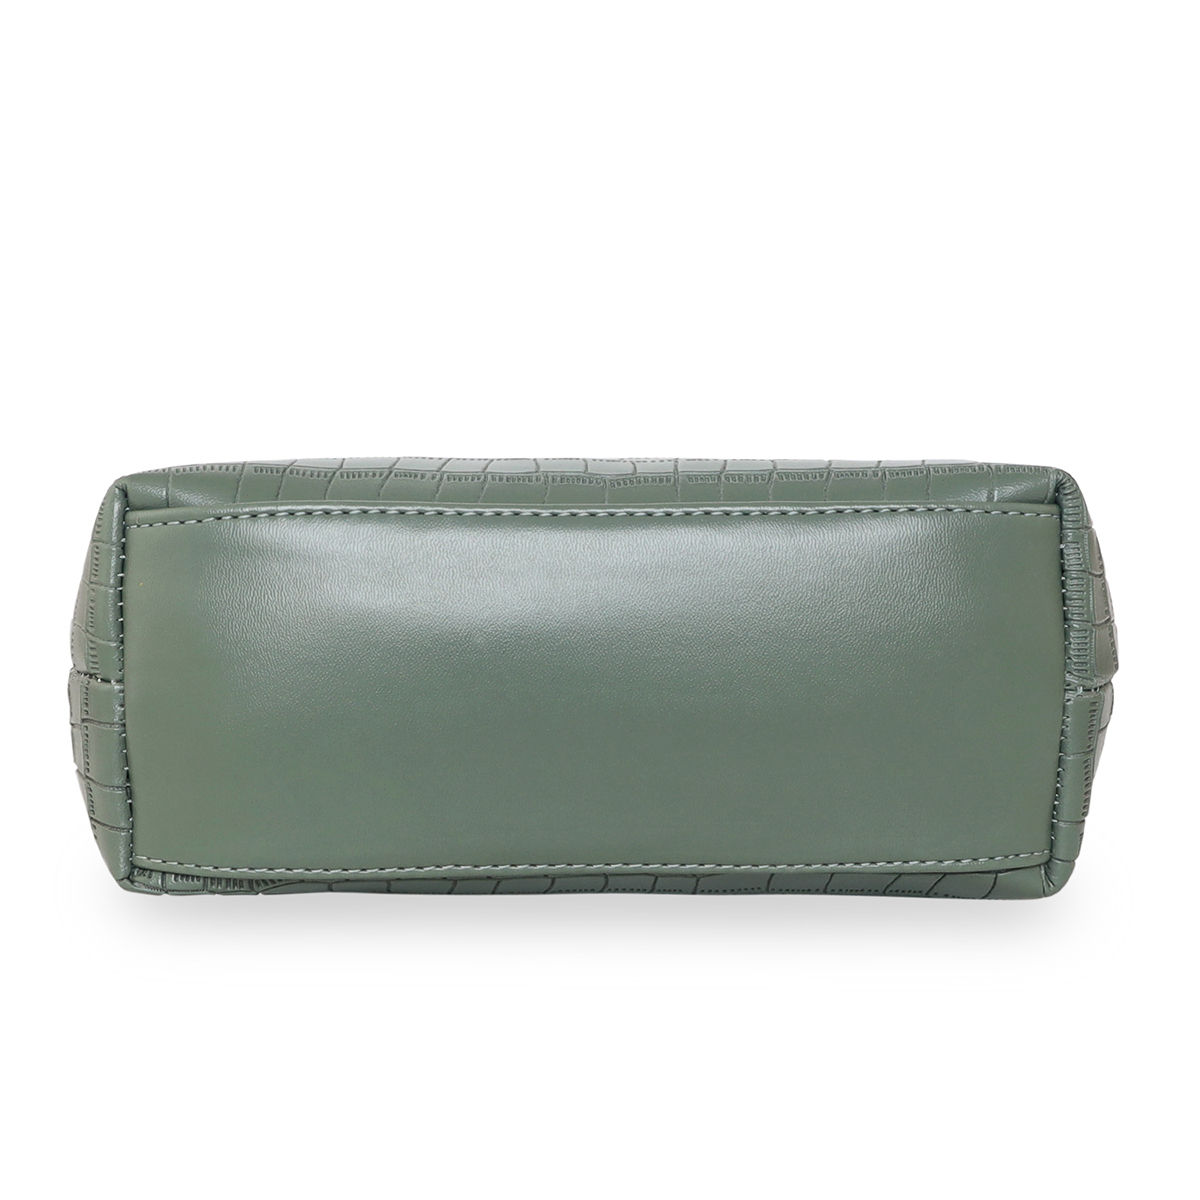 Wallets | Women's Small Clutch Ladies Purse Wallet . Length Size: 12 cm,  Width Size: 9 cm. Colour - Olive Green. NEW. NO FAULT. | Freeup